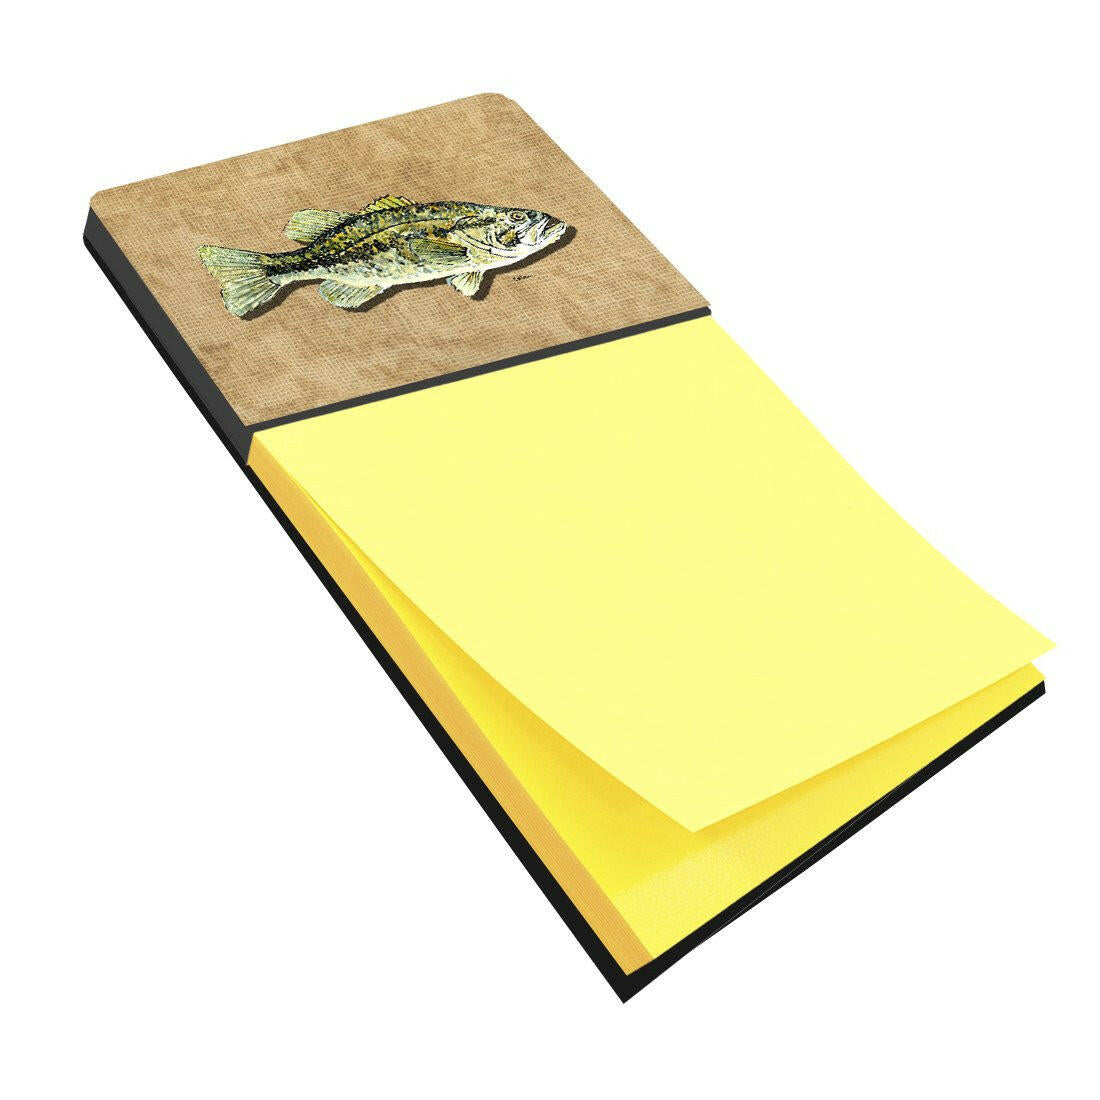 Small Mouth Bass Refiillable Sticky Note Holder or Postit Note Dispenser 8806SN by Caroline's Treasures